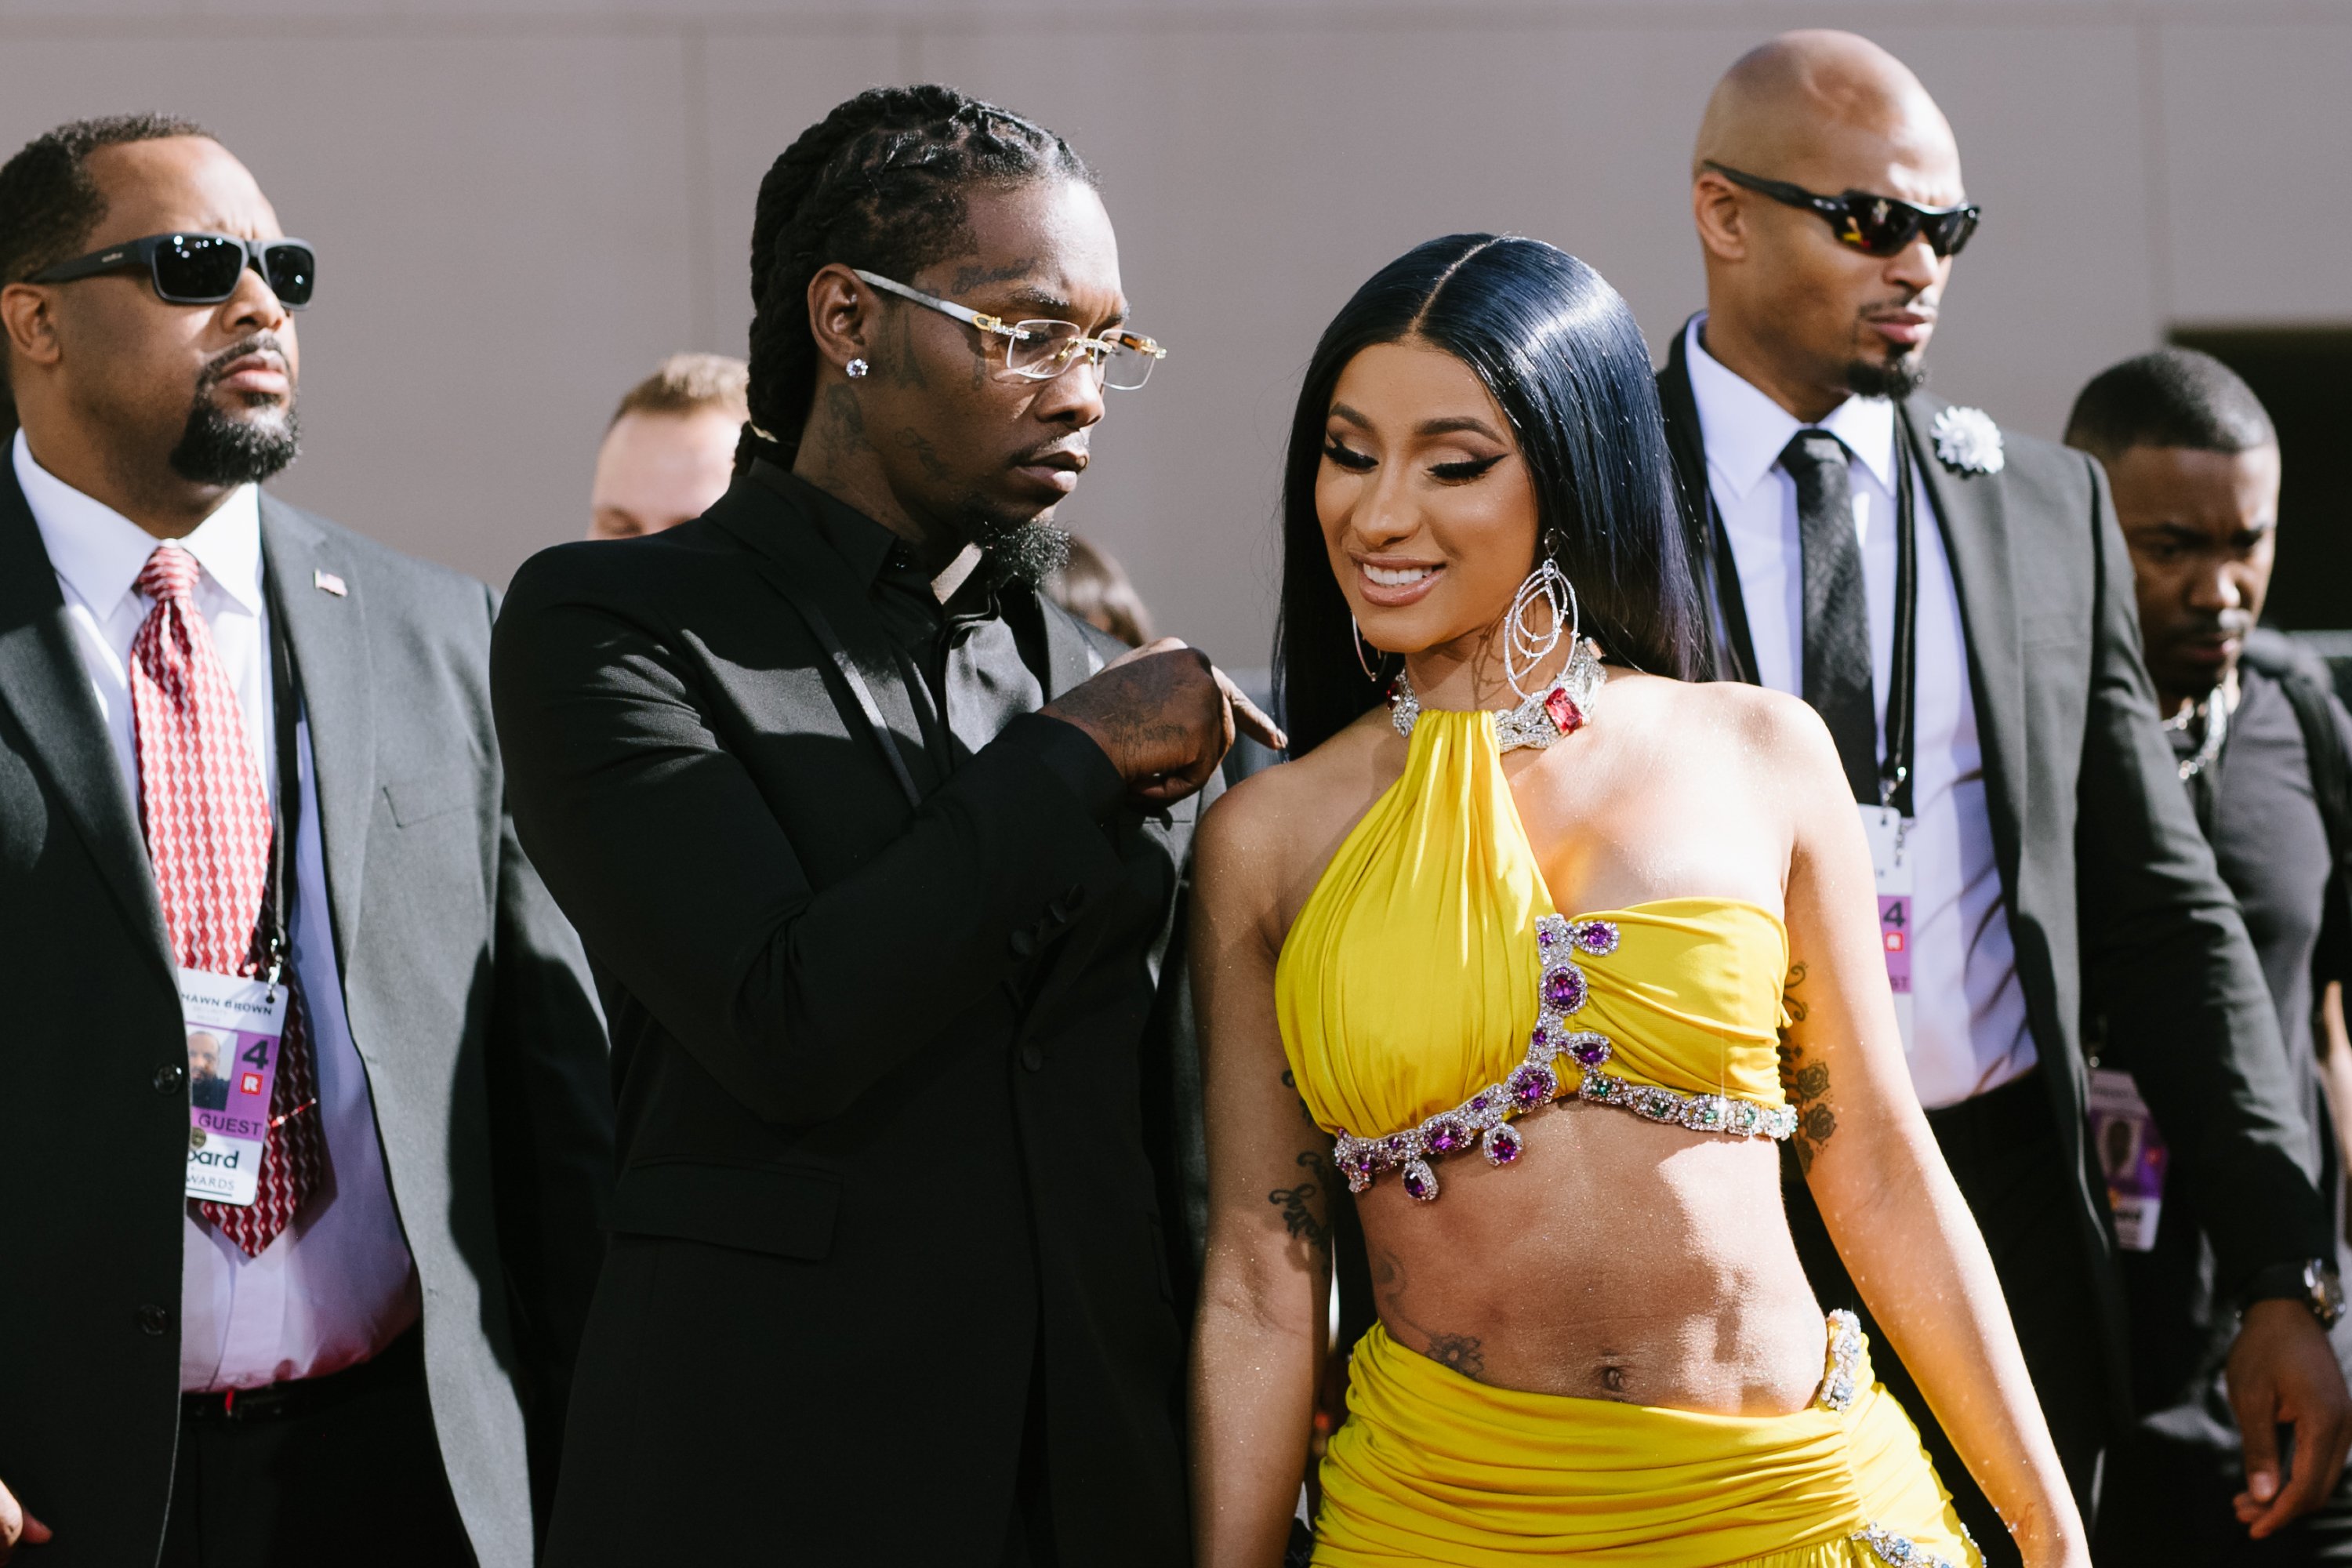 Offset and Cardi B arrive at the 2019 Billboard Music Awards. | Photo: GettyImages